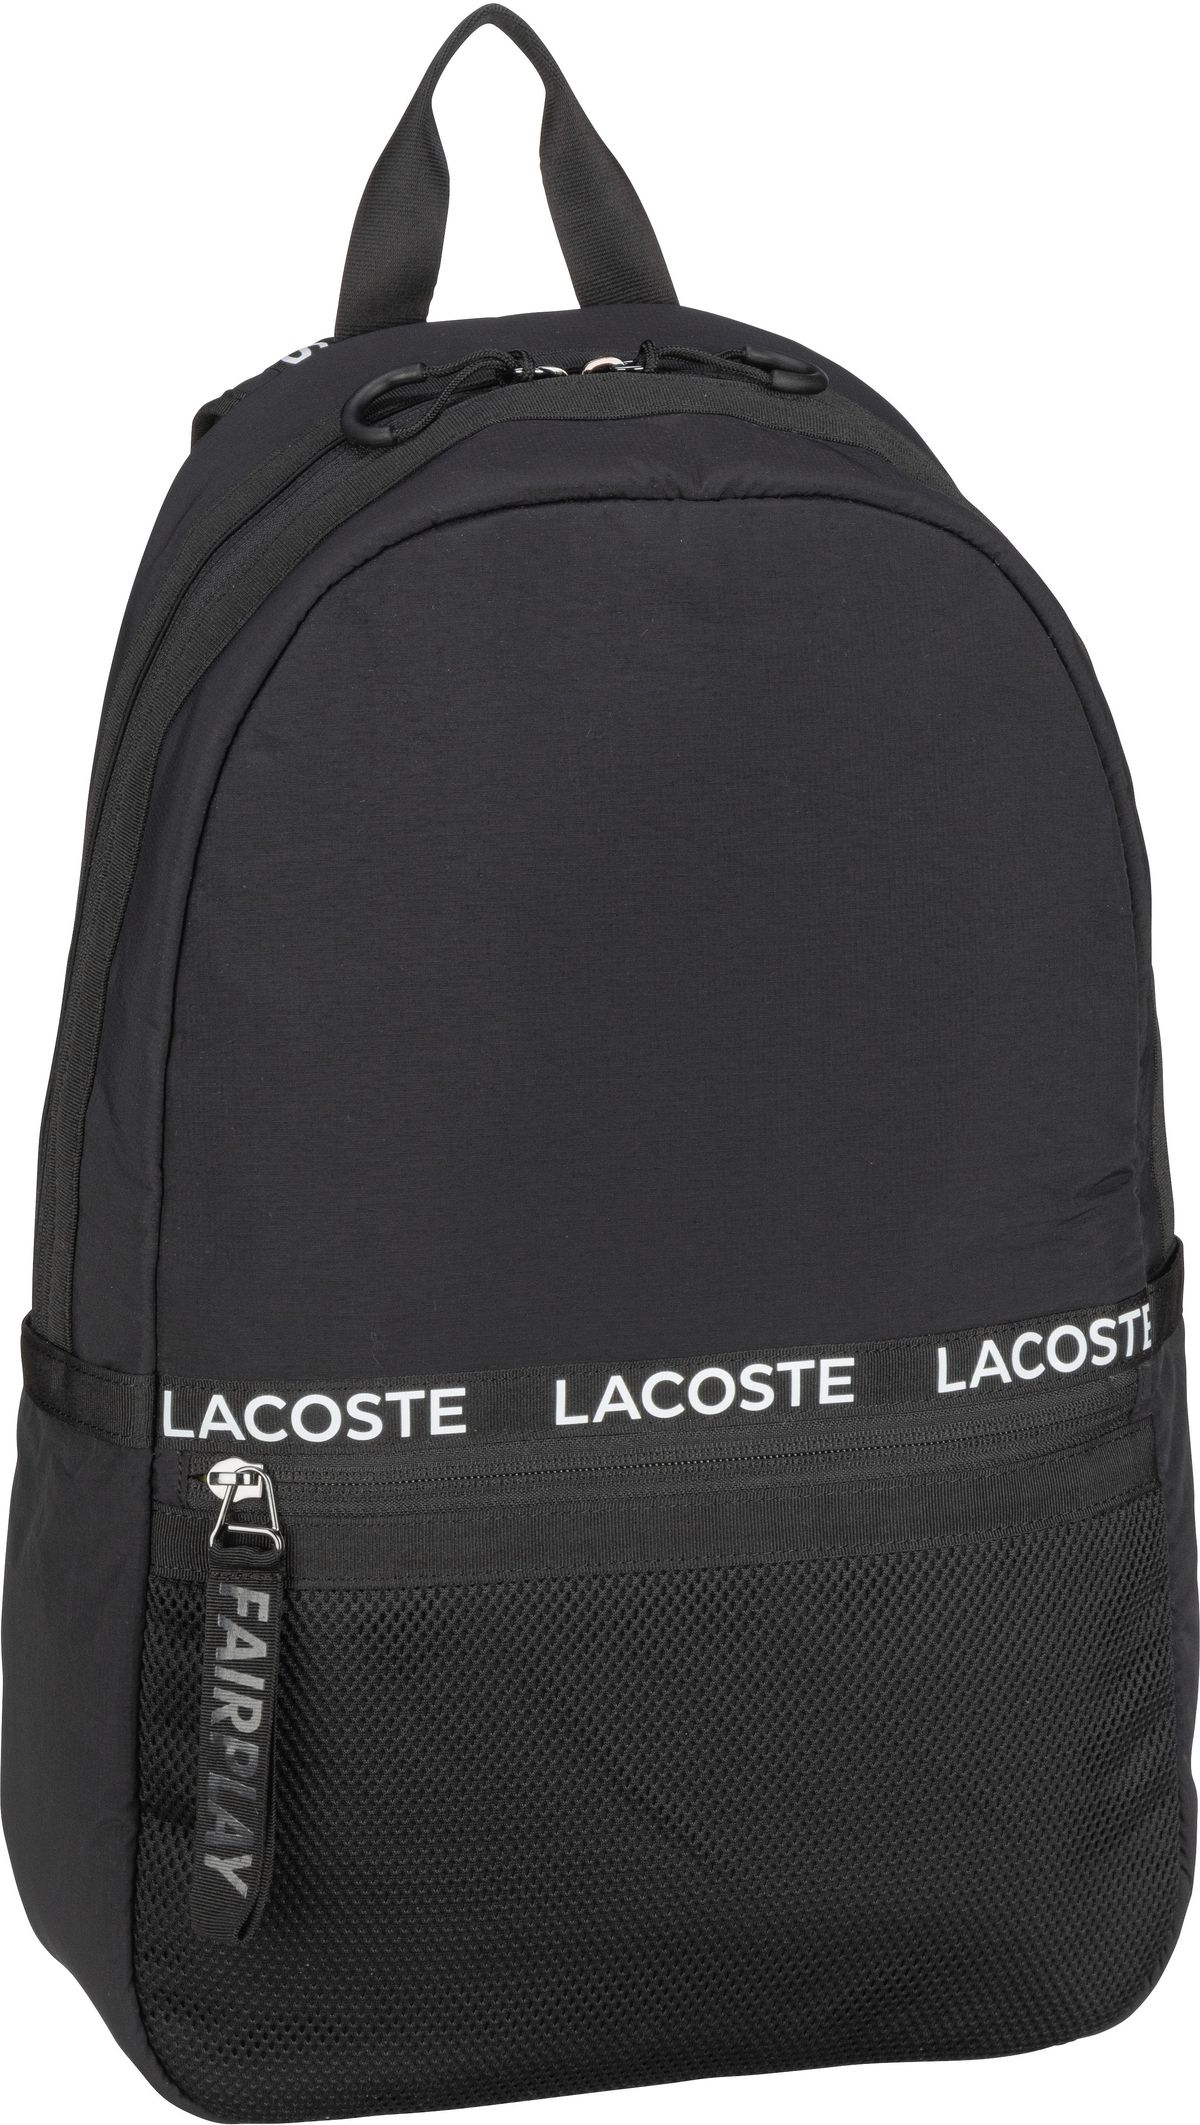 Lacoste Freedom Backpack - Black